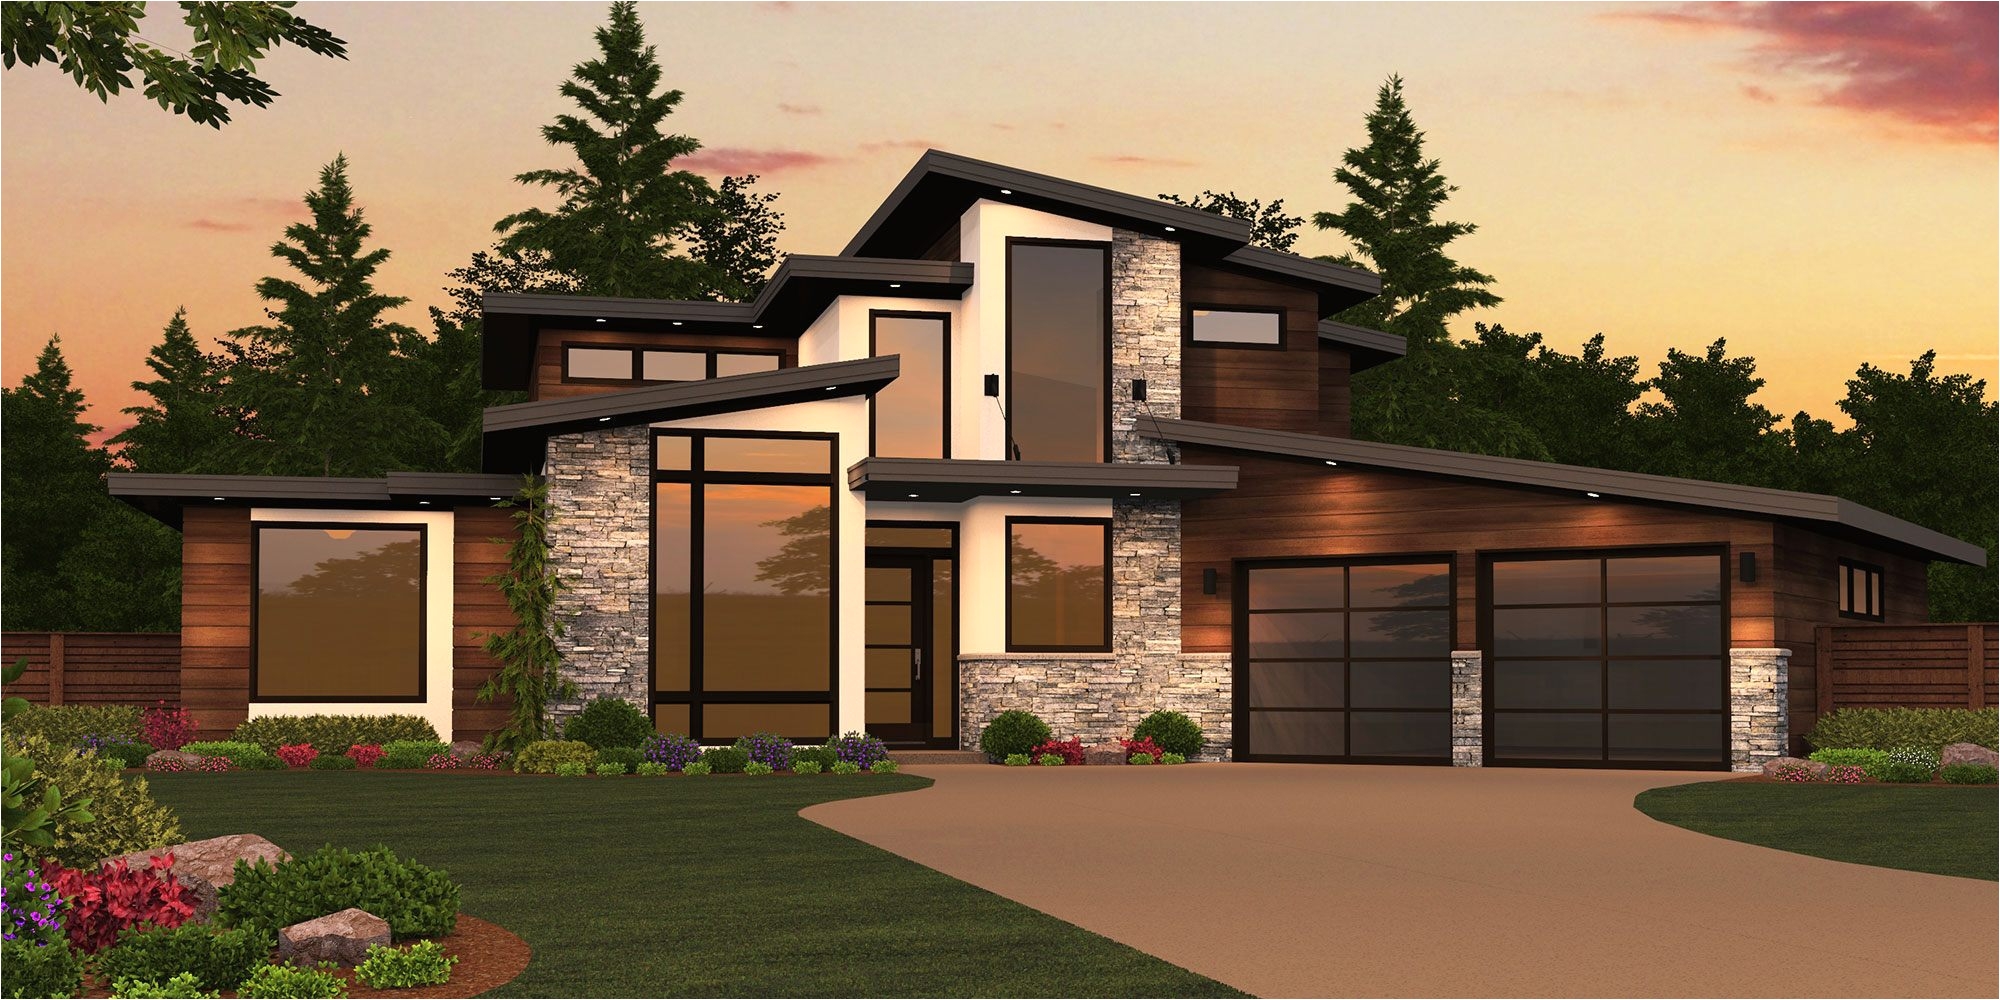 side entry garage house plans modern house plans home designs shop floor plans with s